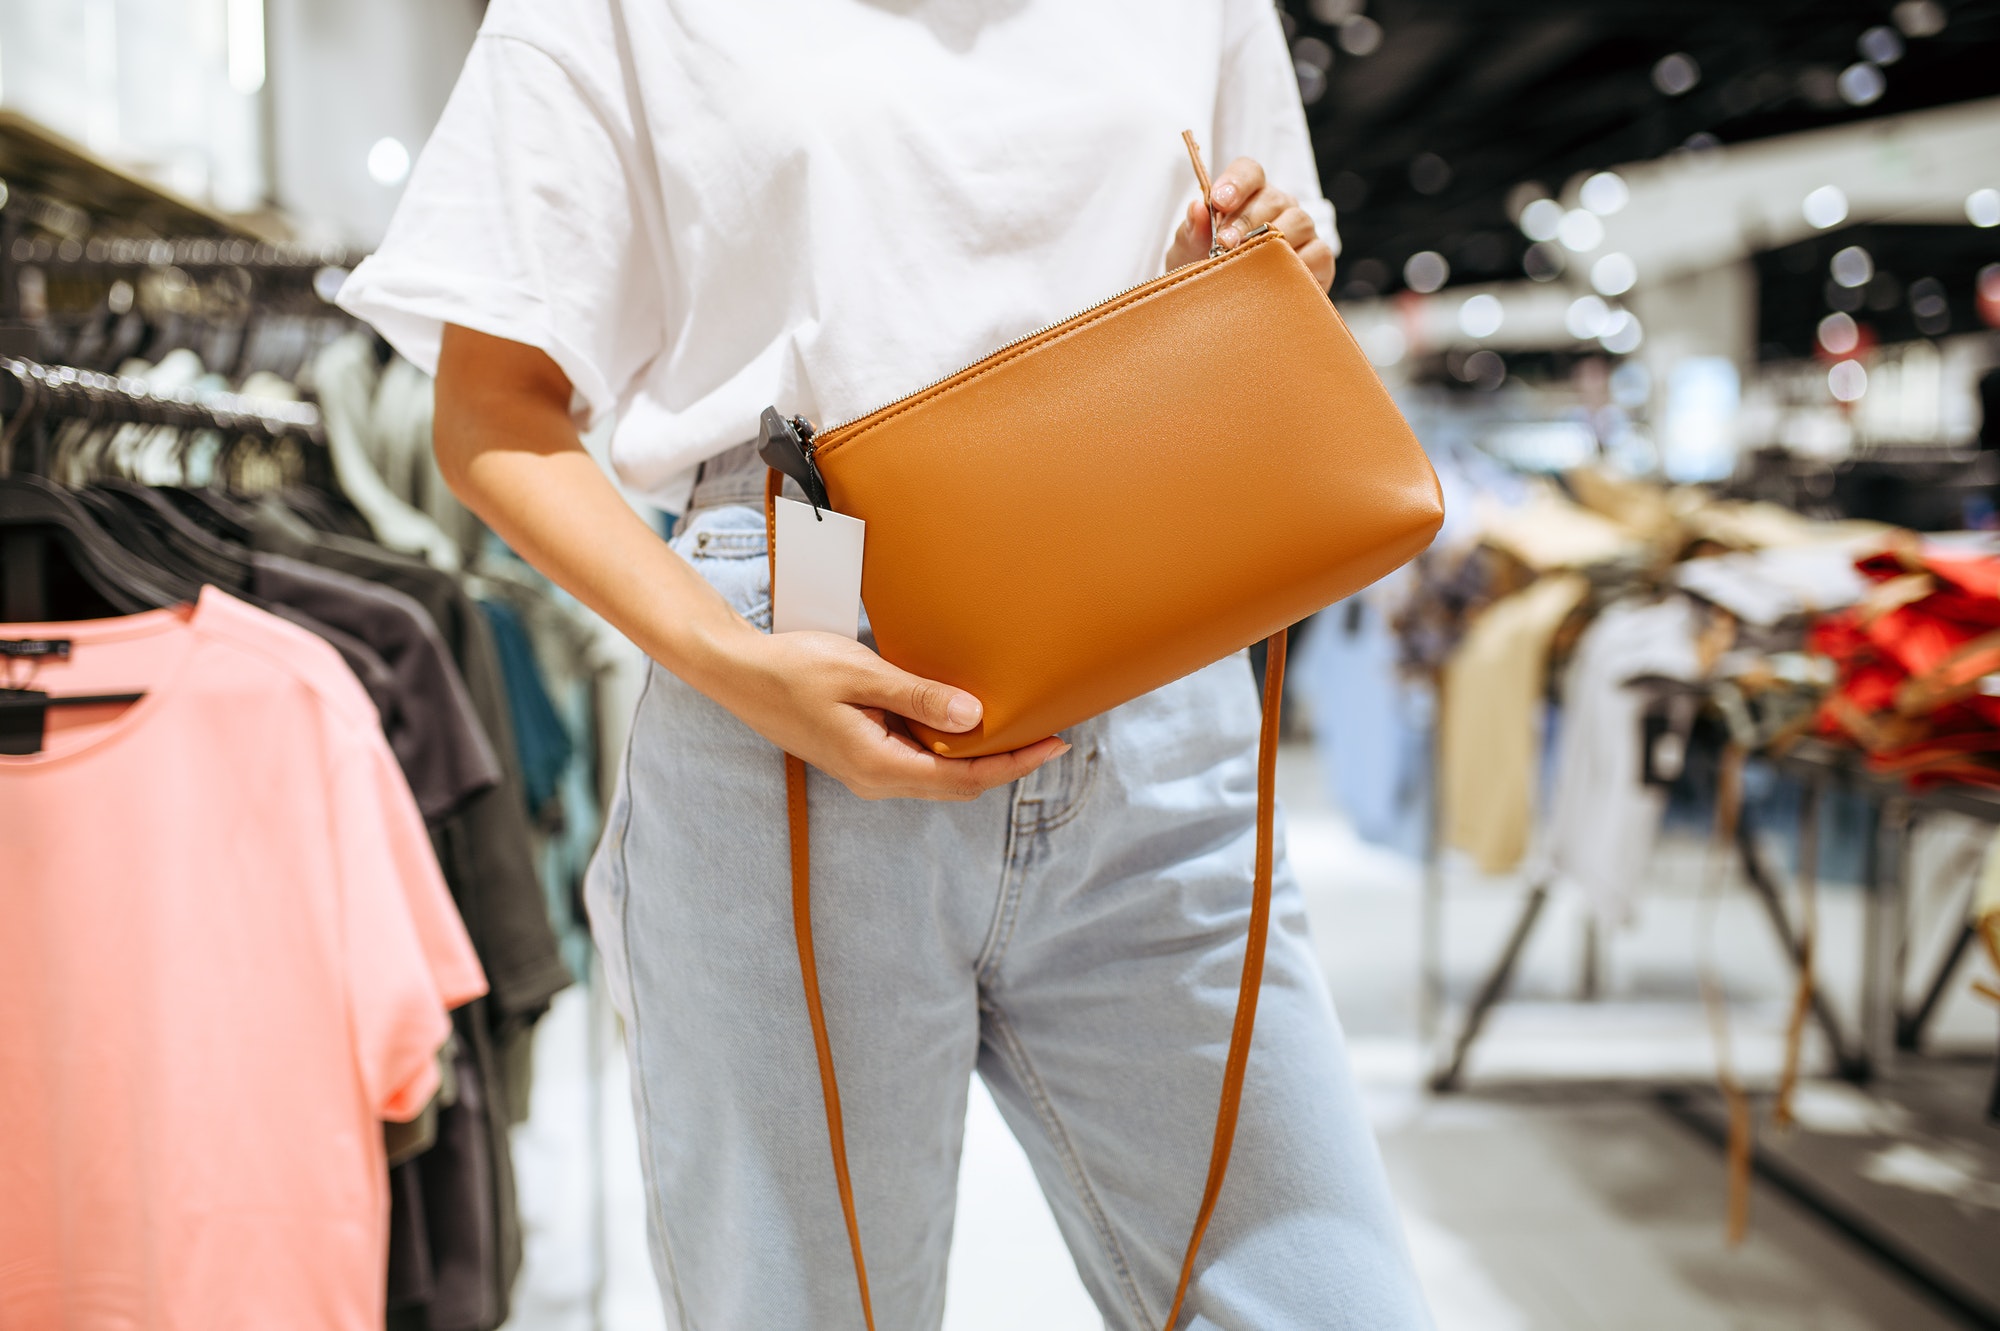 Woman holds handbag in clothing store